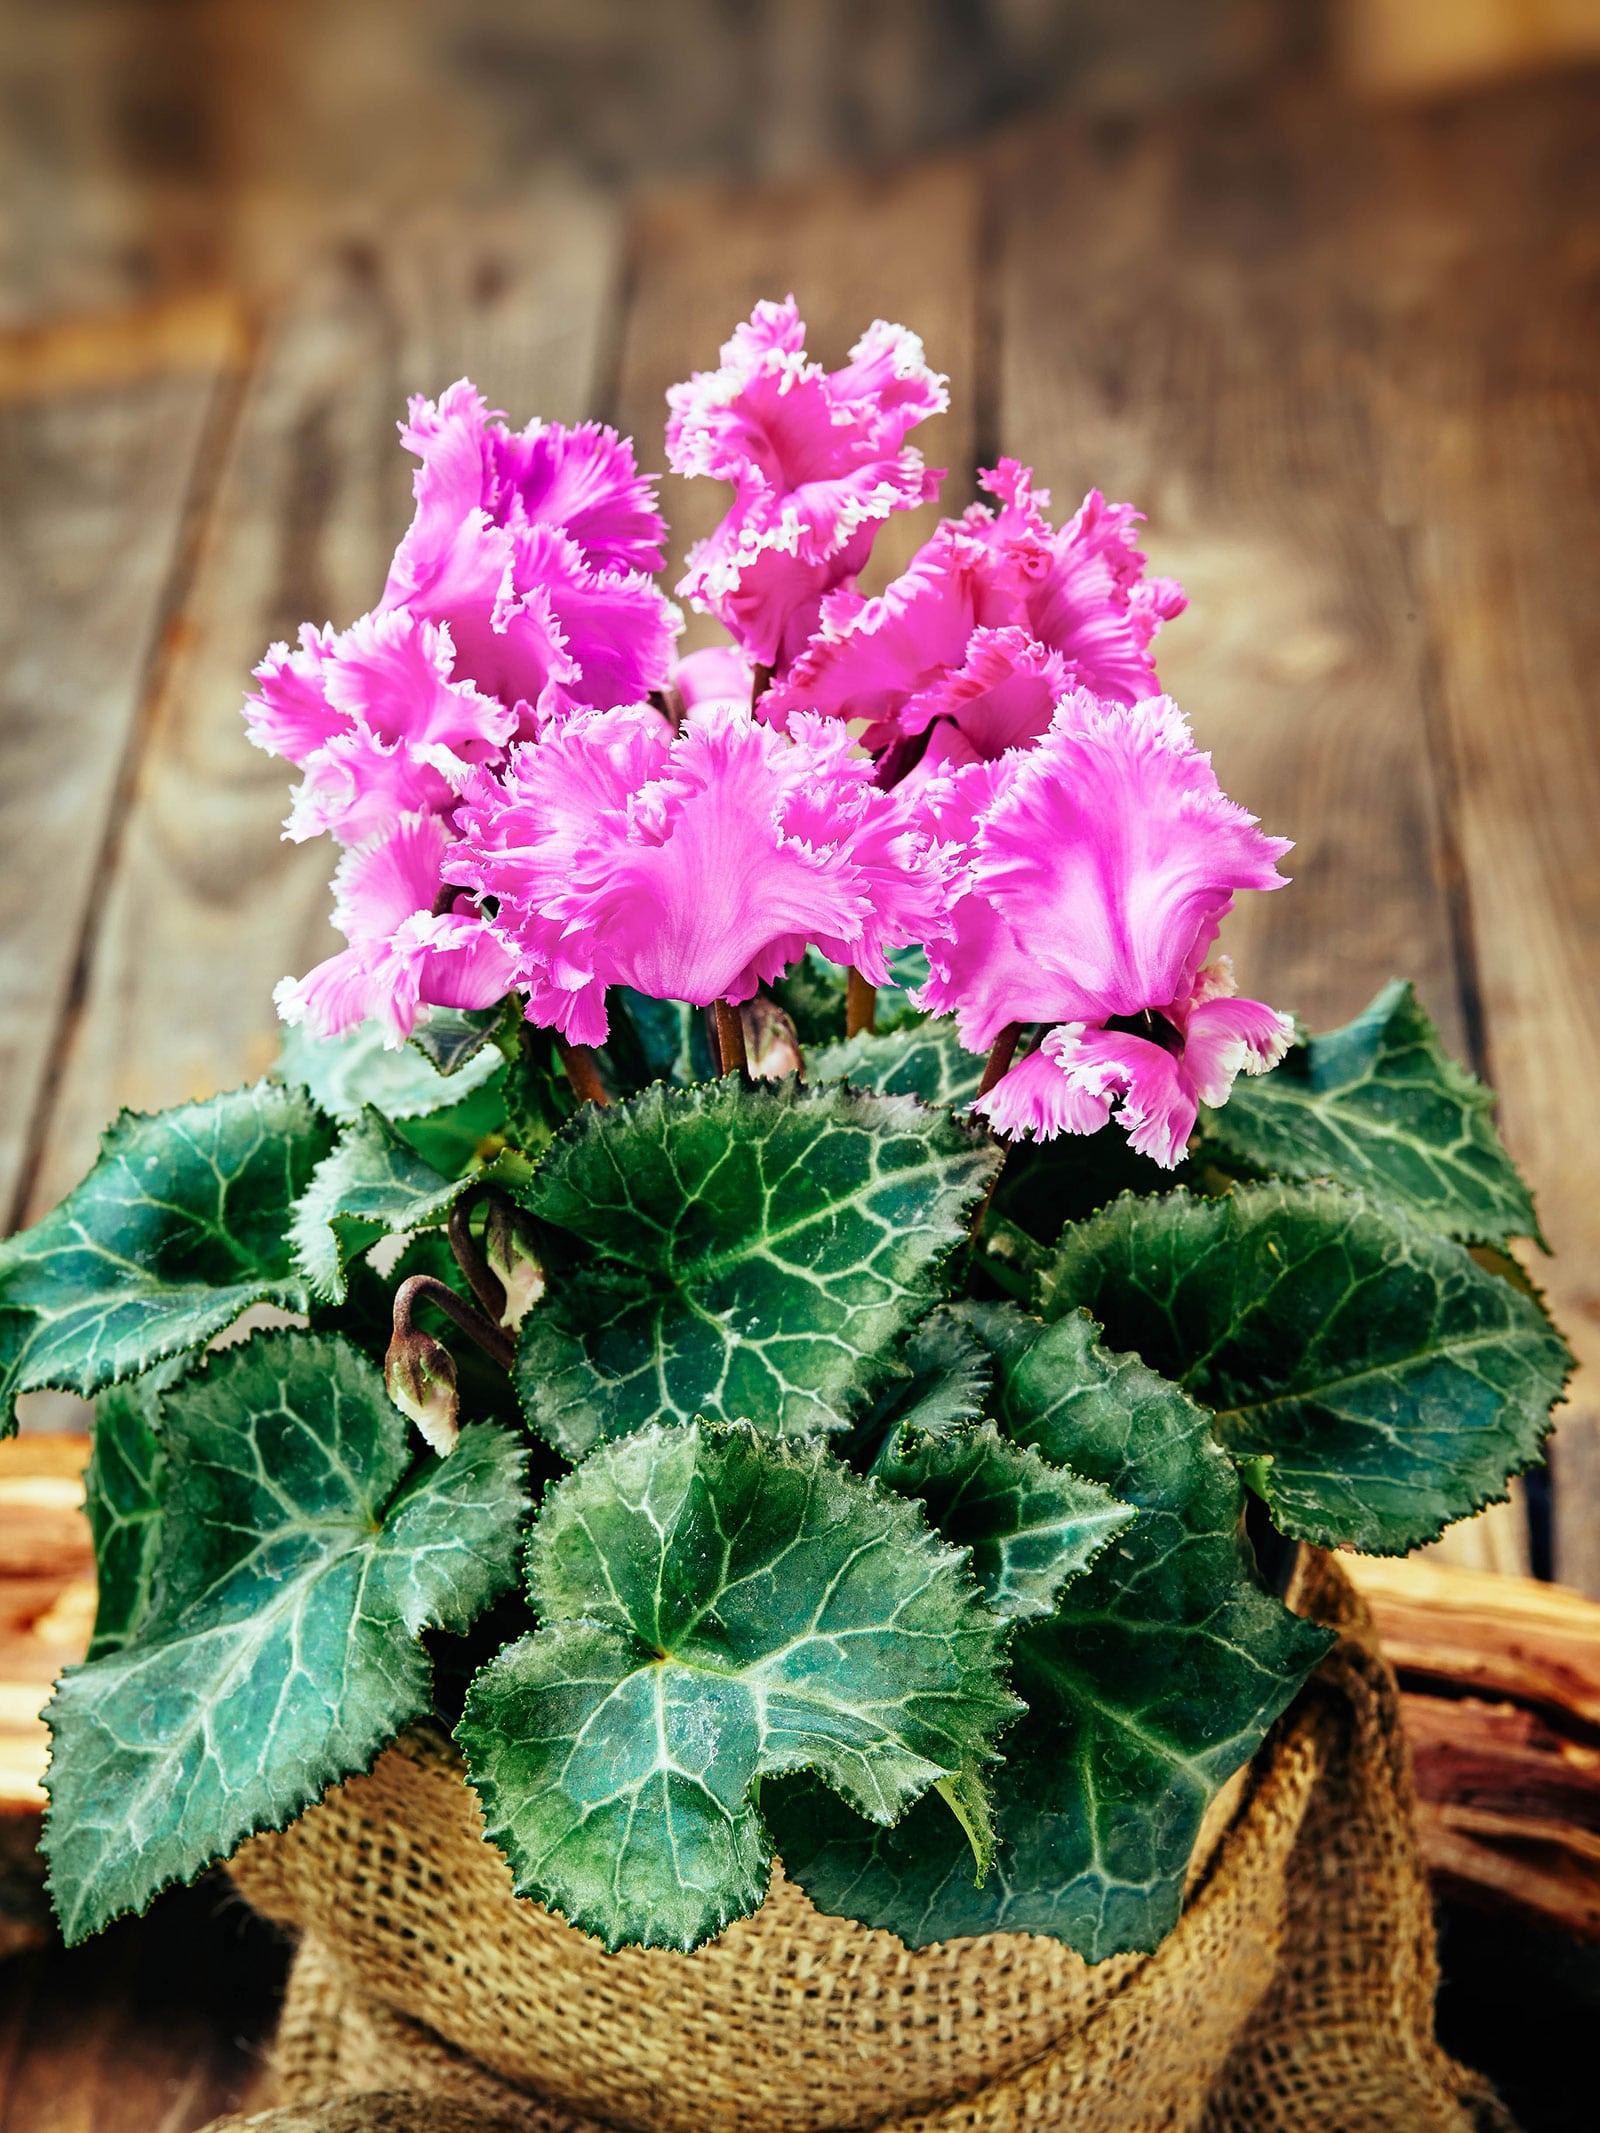 A bright pink cyclamen houseplant in a burlap-wrapped pot, shot against a rustic wooden background